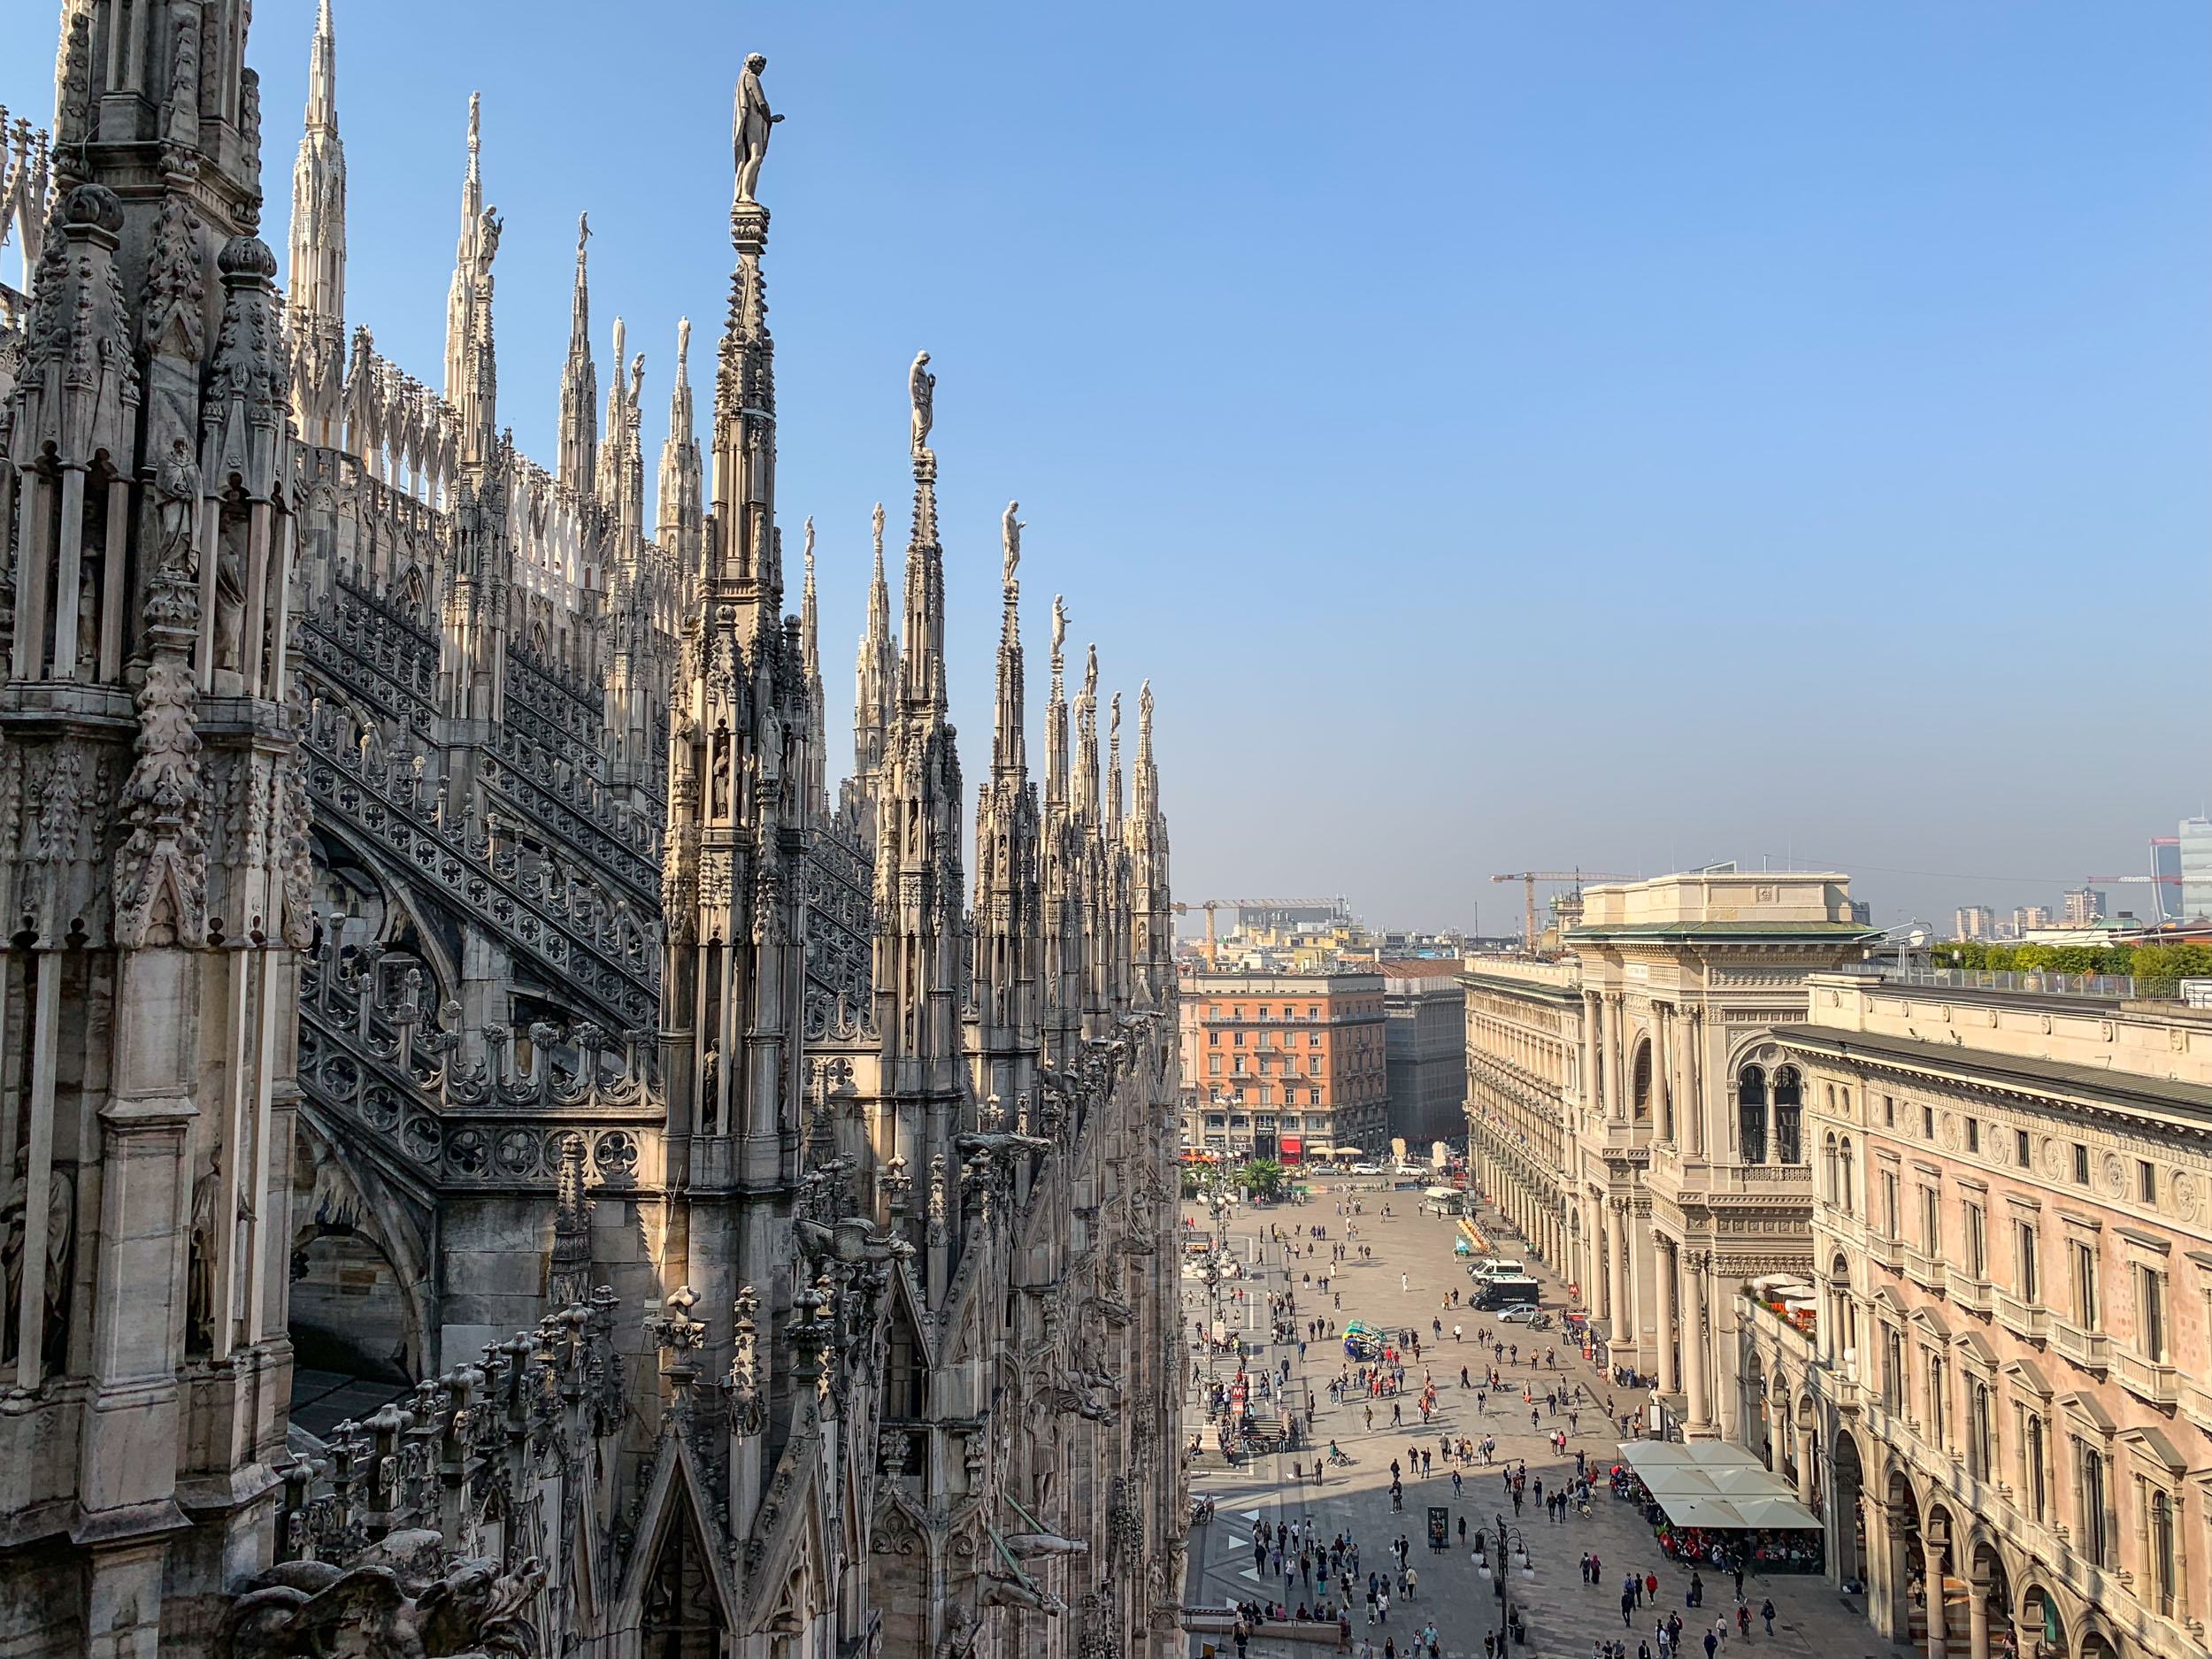 View from the roof of Milan's cathedral